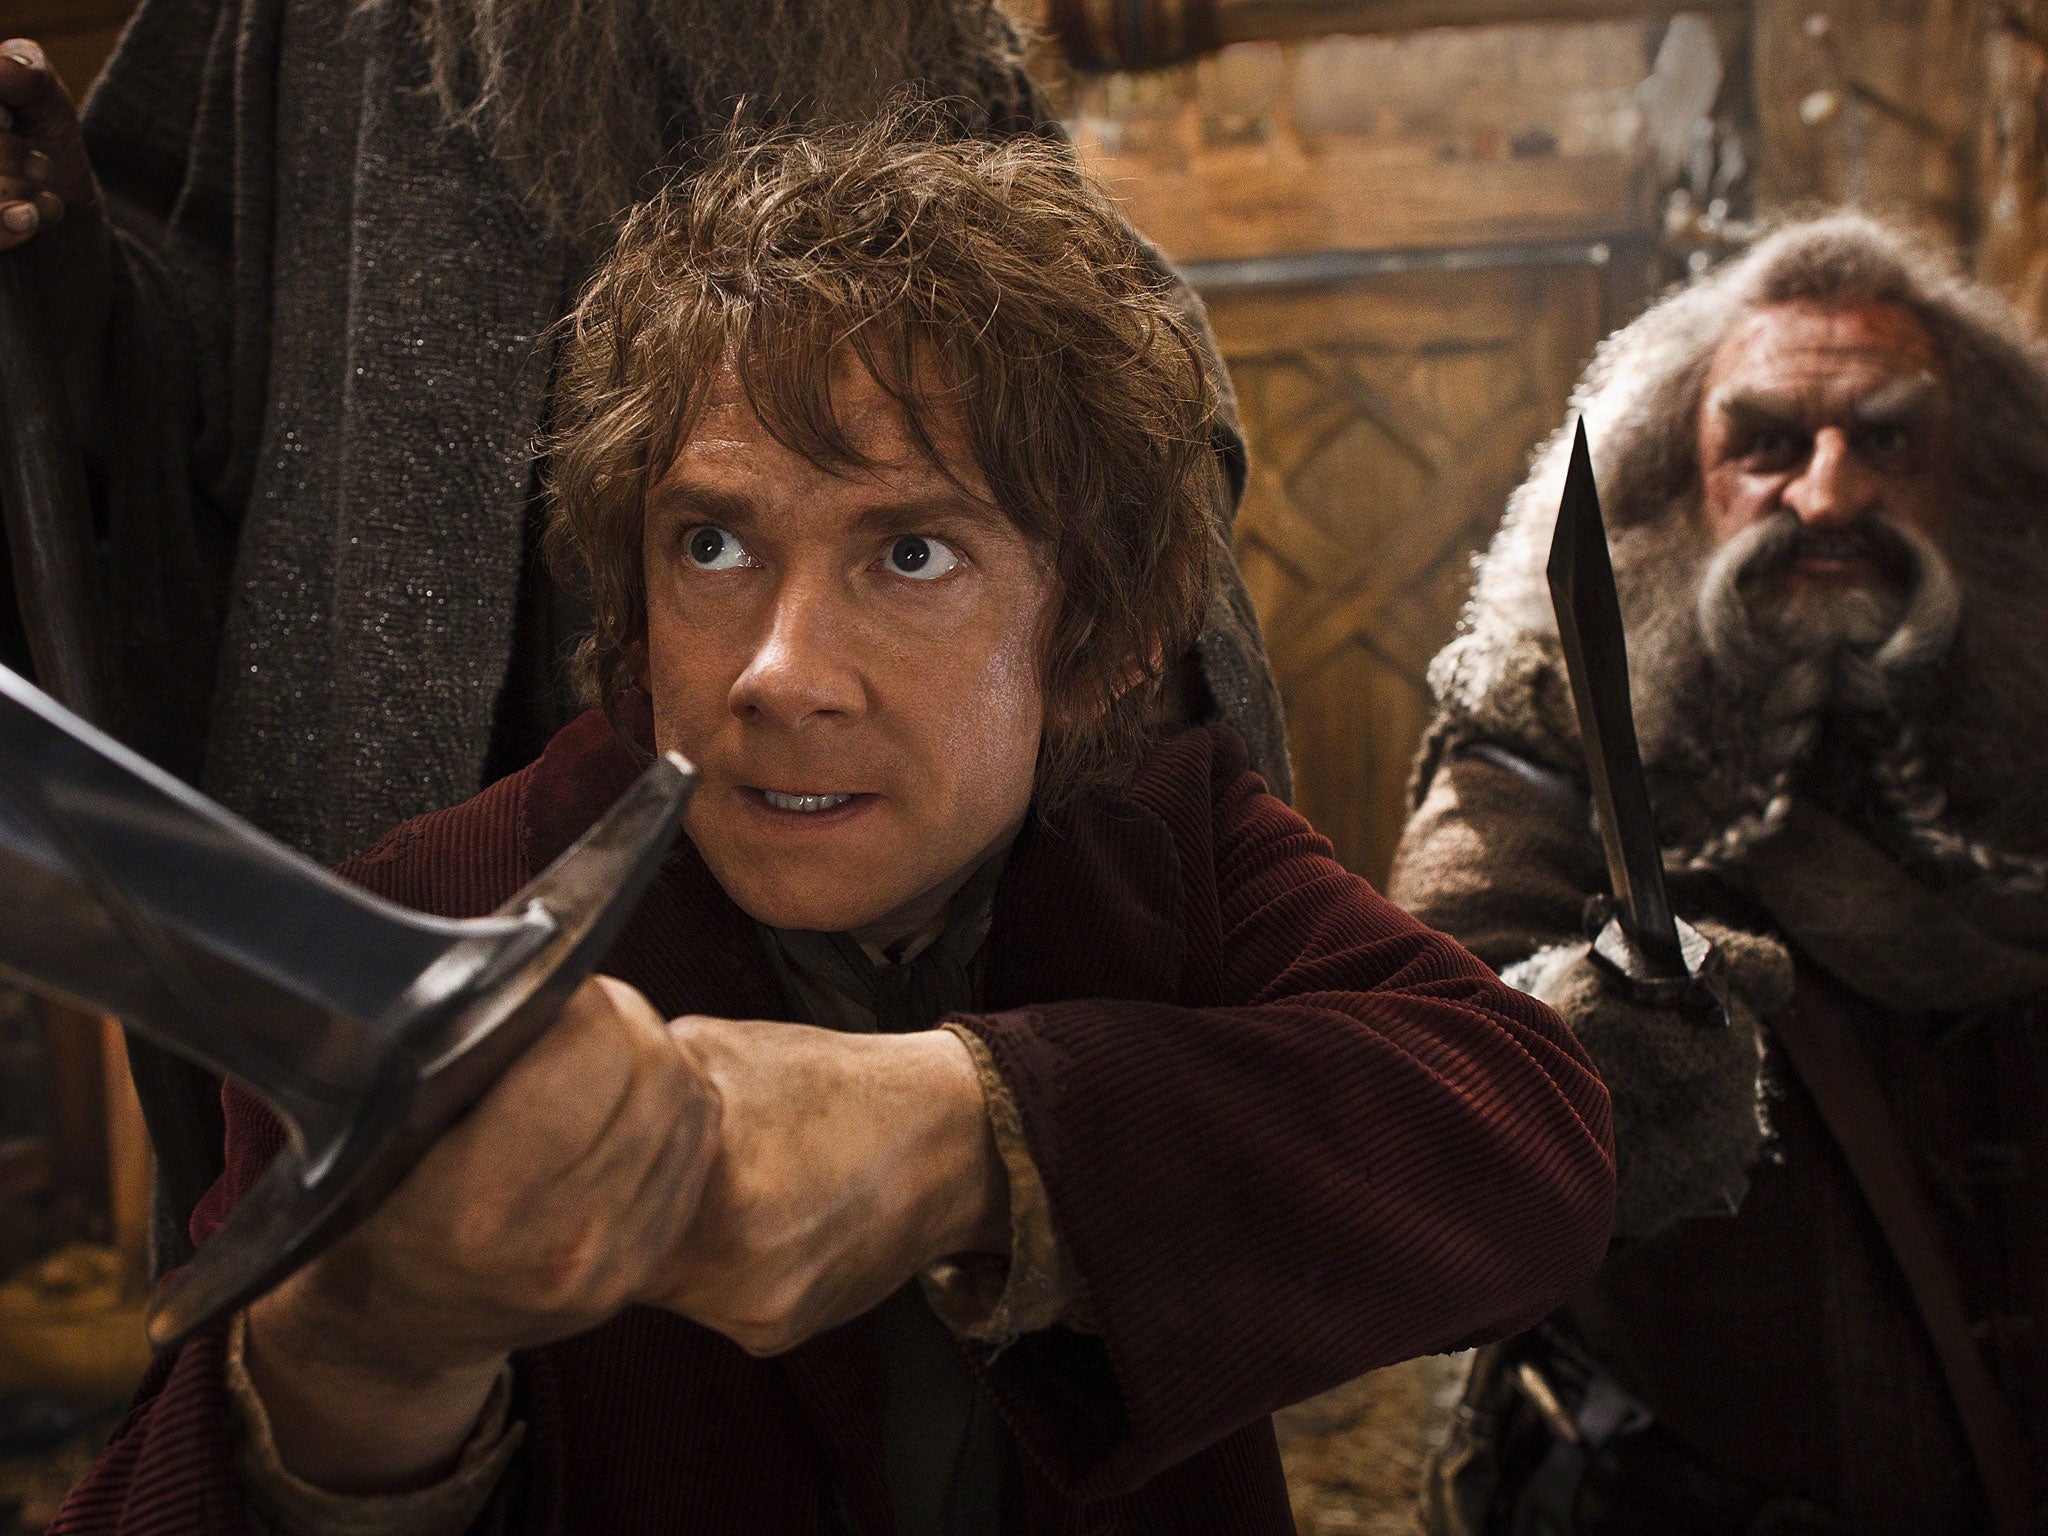 According to studio estimates Sunday, Peter Jackson's 'Hobbit' sequel took in $31.5 million in its second weekend of release. That topped Will Ferrell's 'Anchorman' sequel, which nevertheless opened strongly in second place